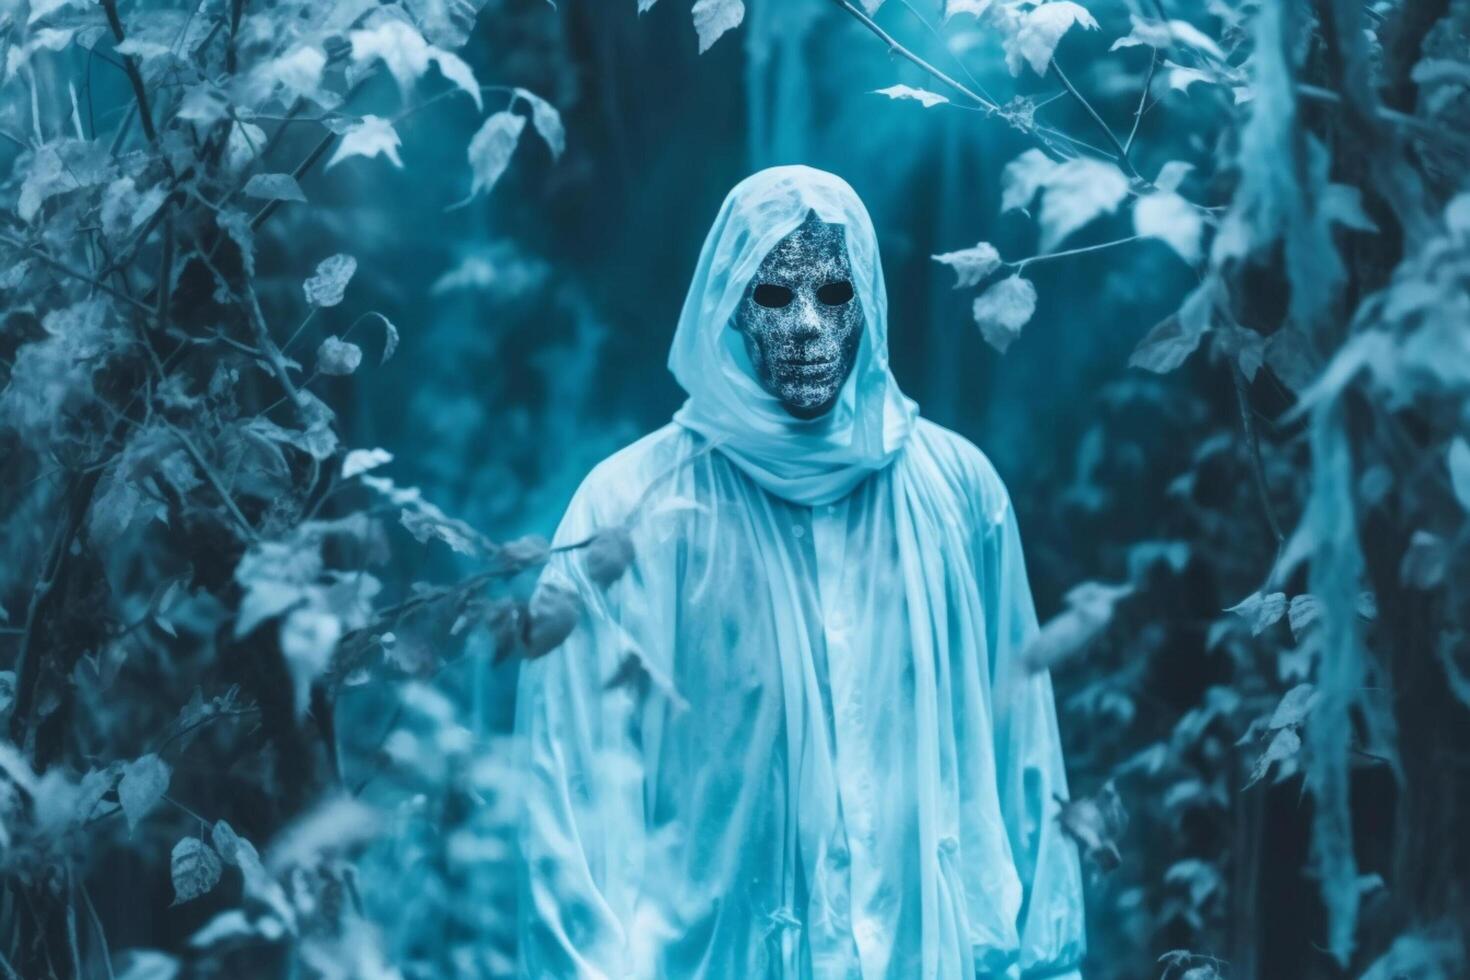 Human in spooky ghosts costume flying inside the old house or forest at night. Spooky halloween background with ghost. Ghost on halloween celebration concept by photo